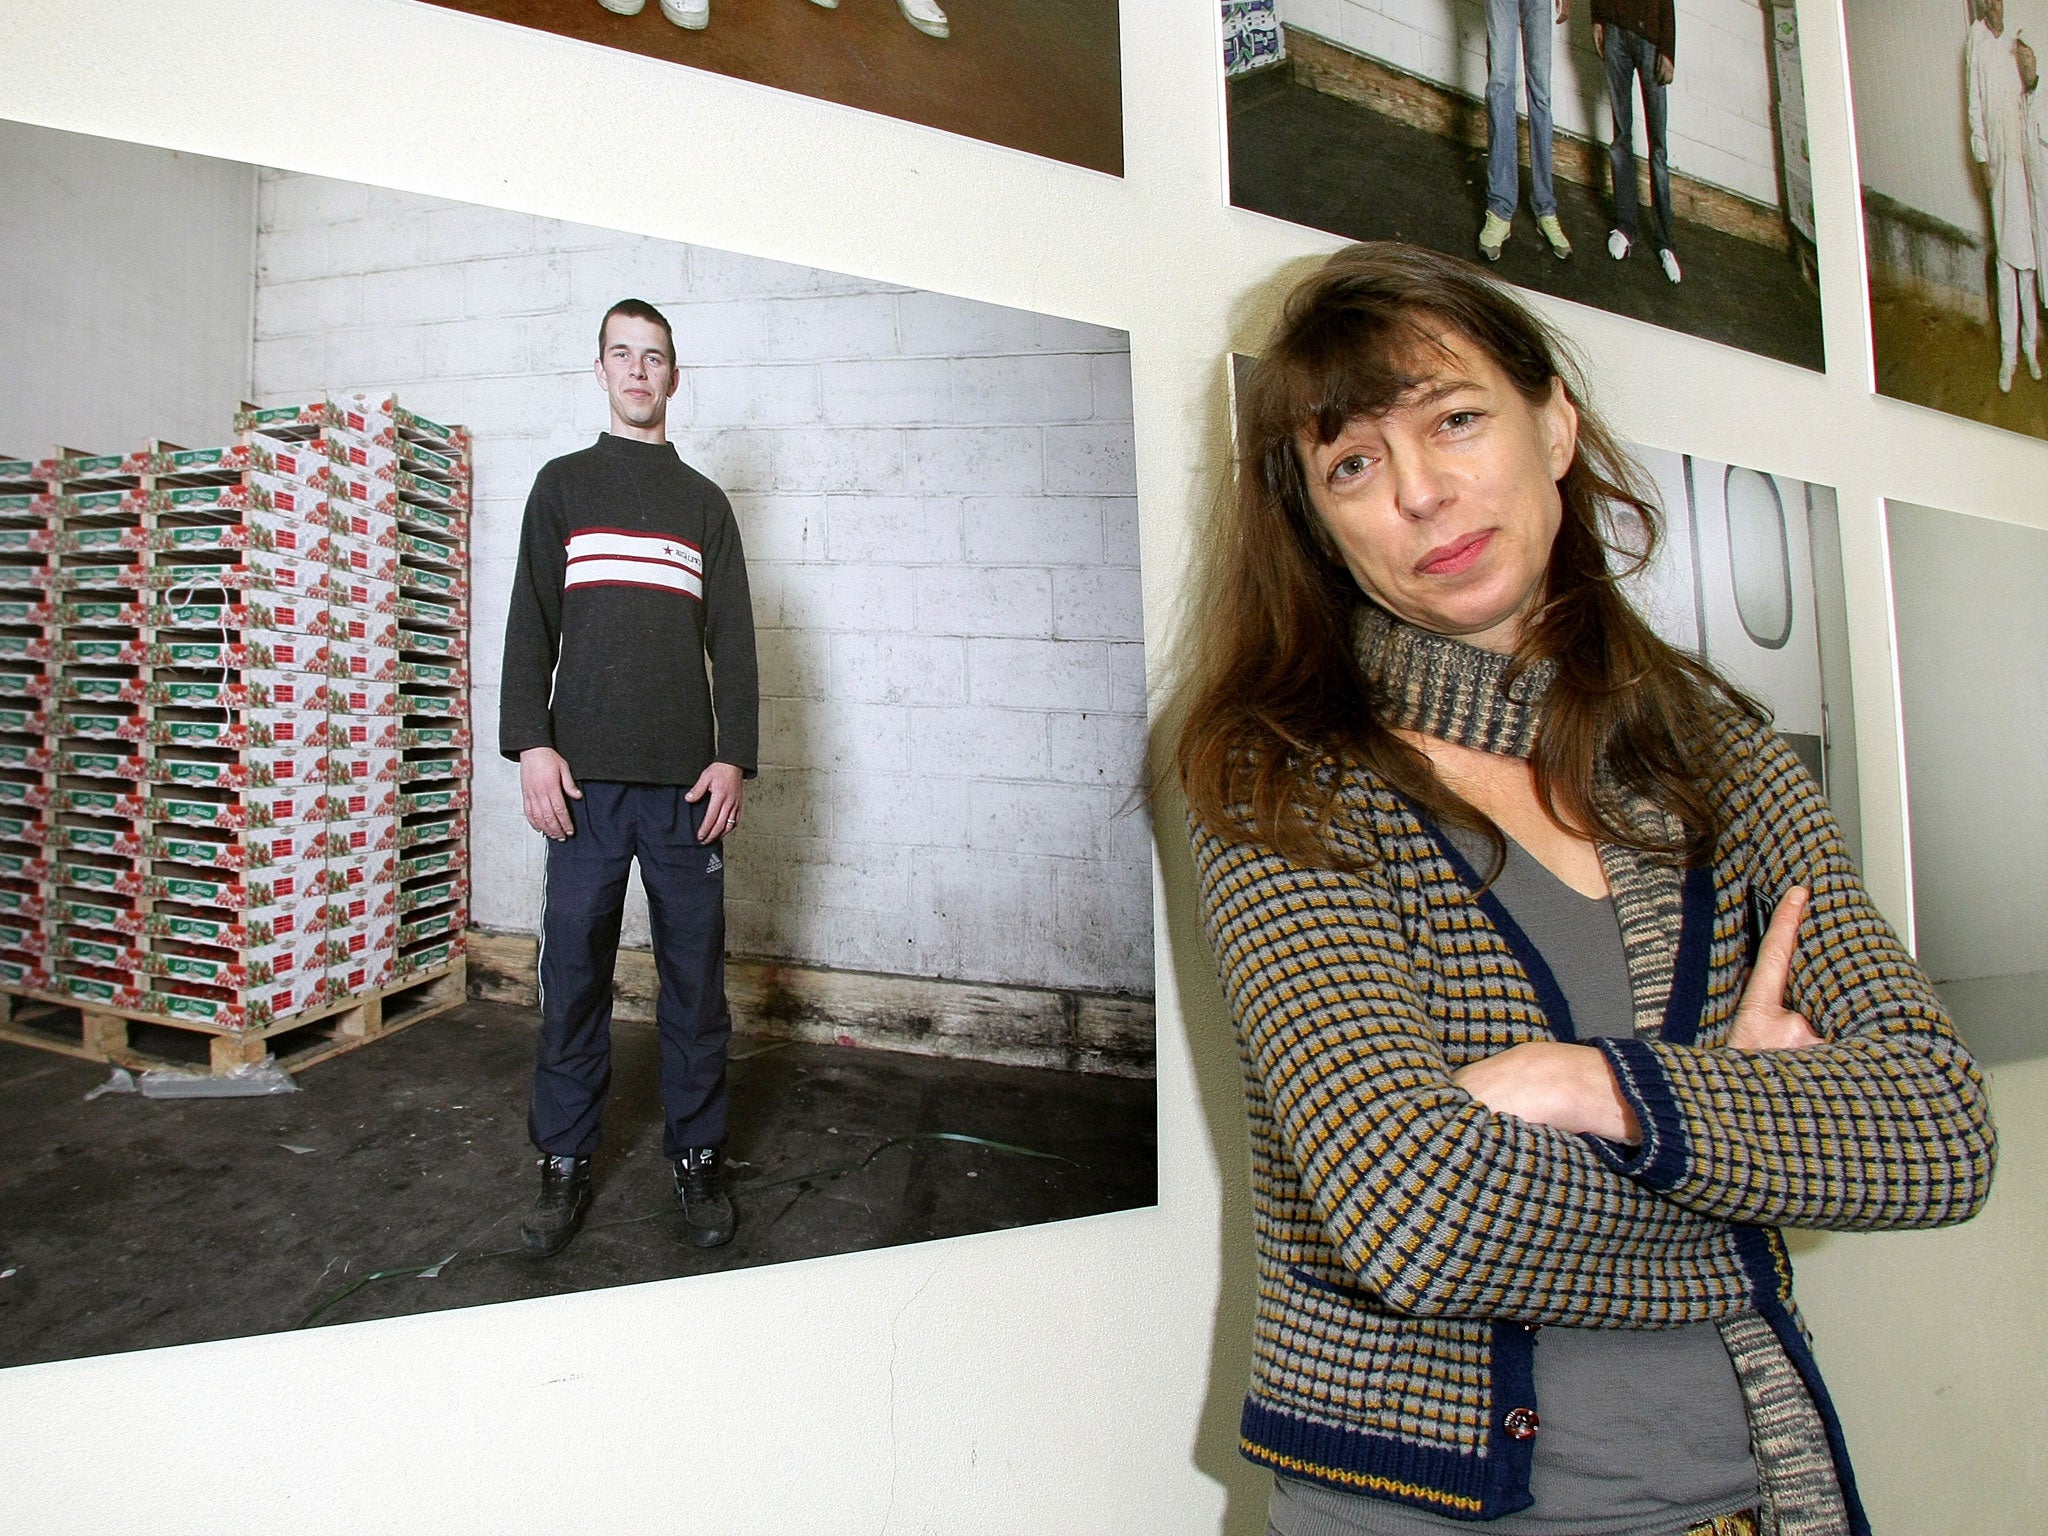 Barry in 2009 with pictures she had taken at the Rungis Market in Paris